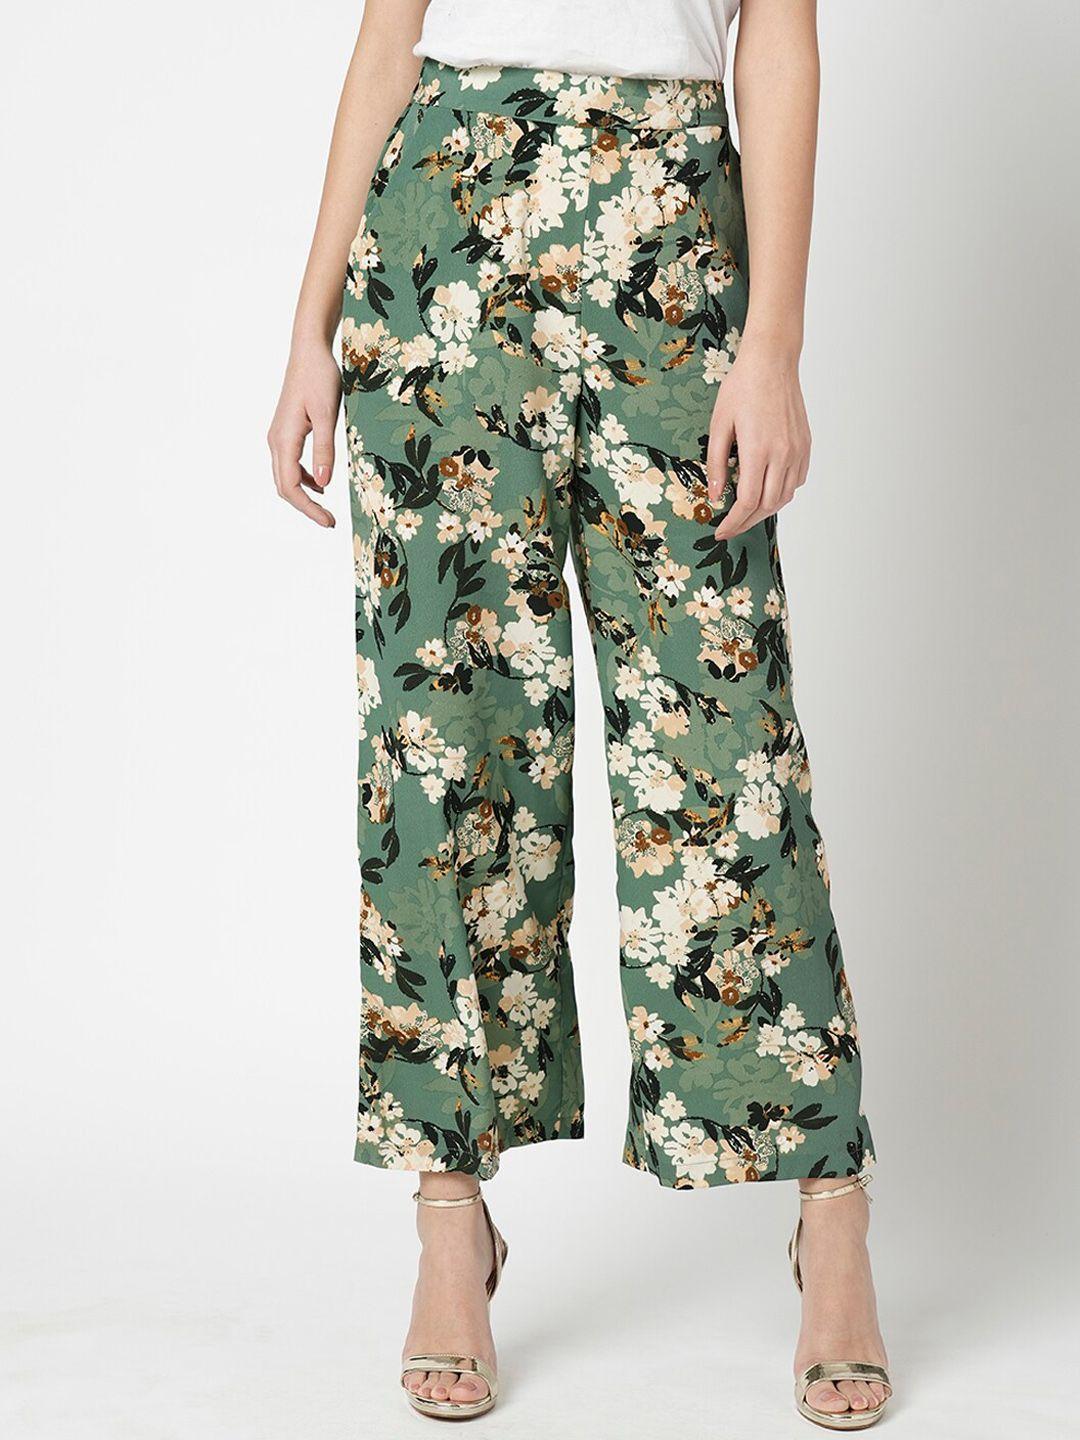 vero moda women green floral printed straight fit high-rise culottes trousers